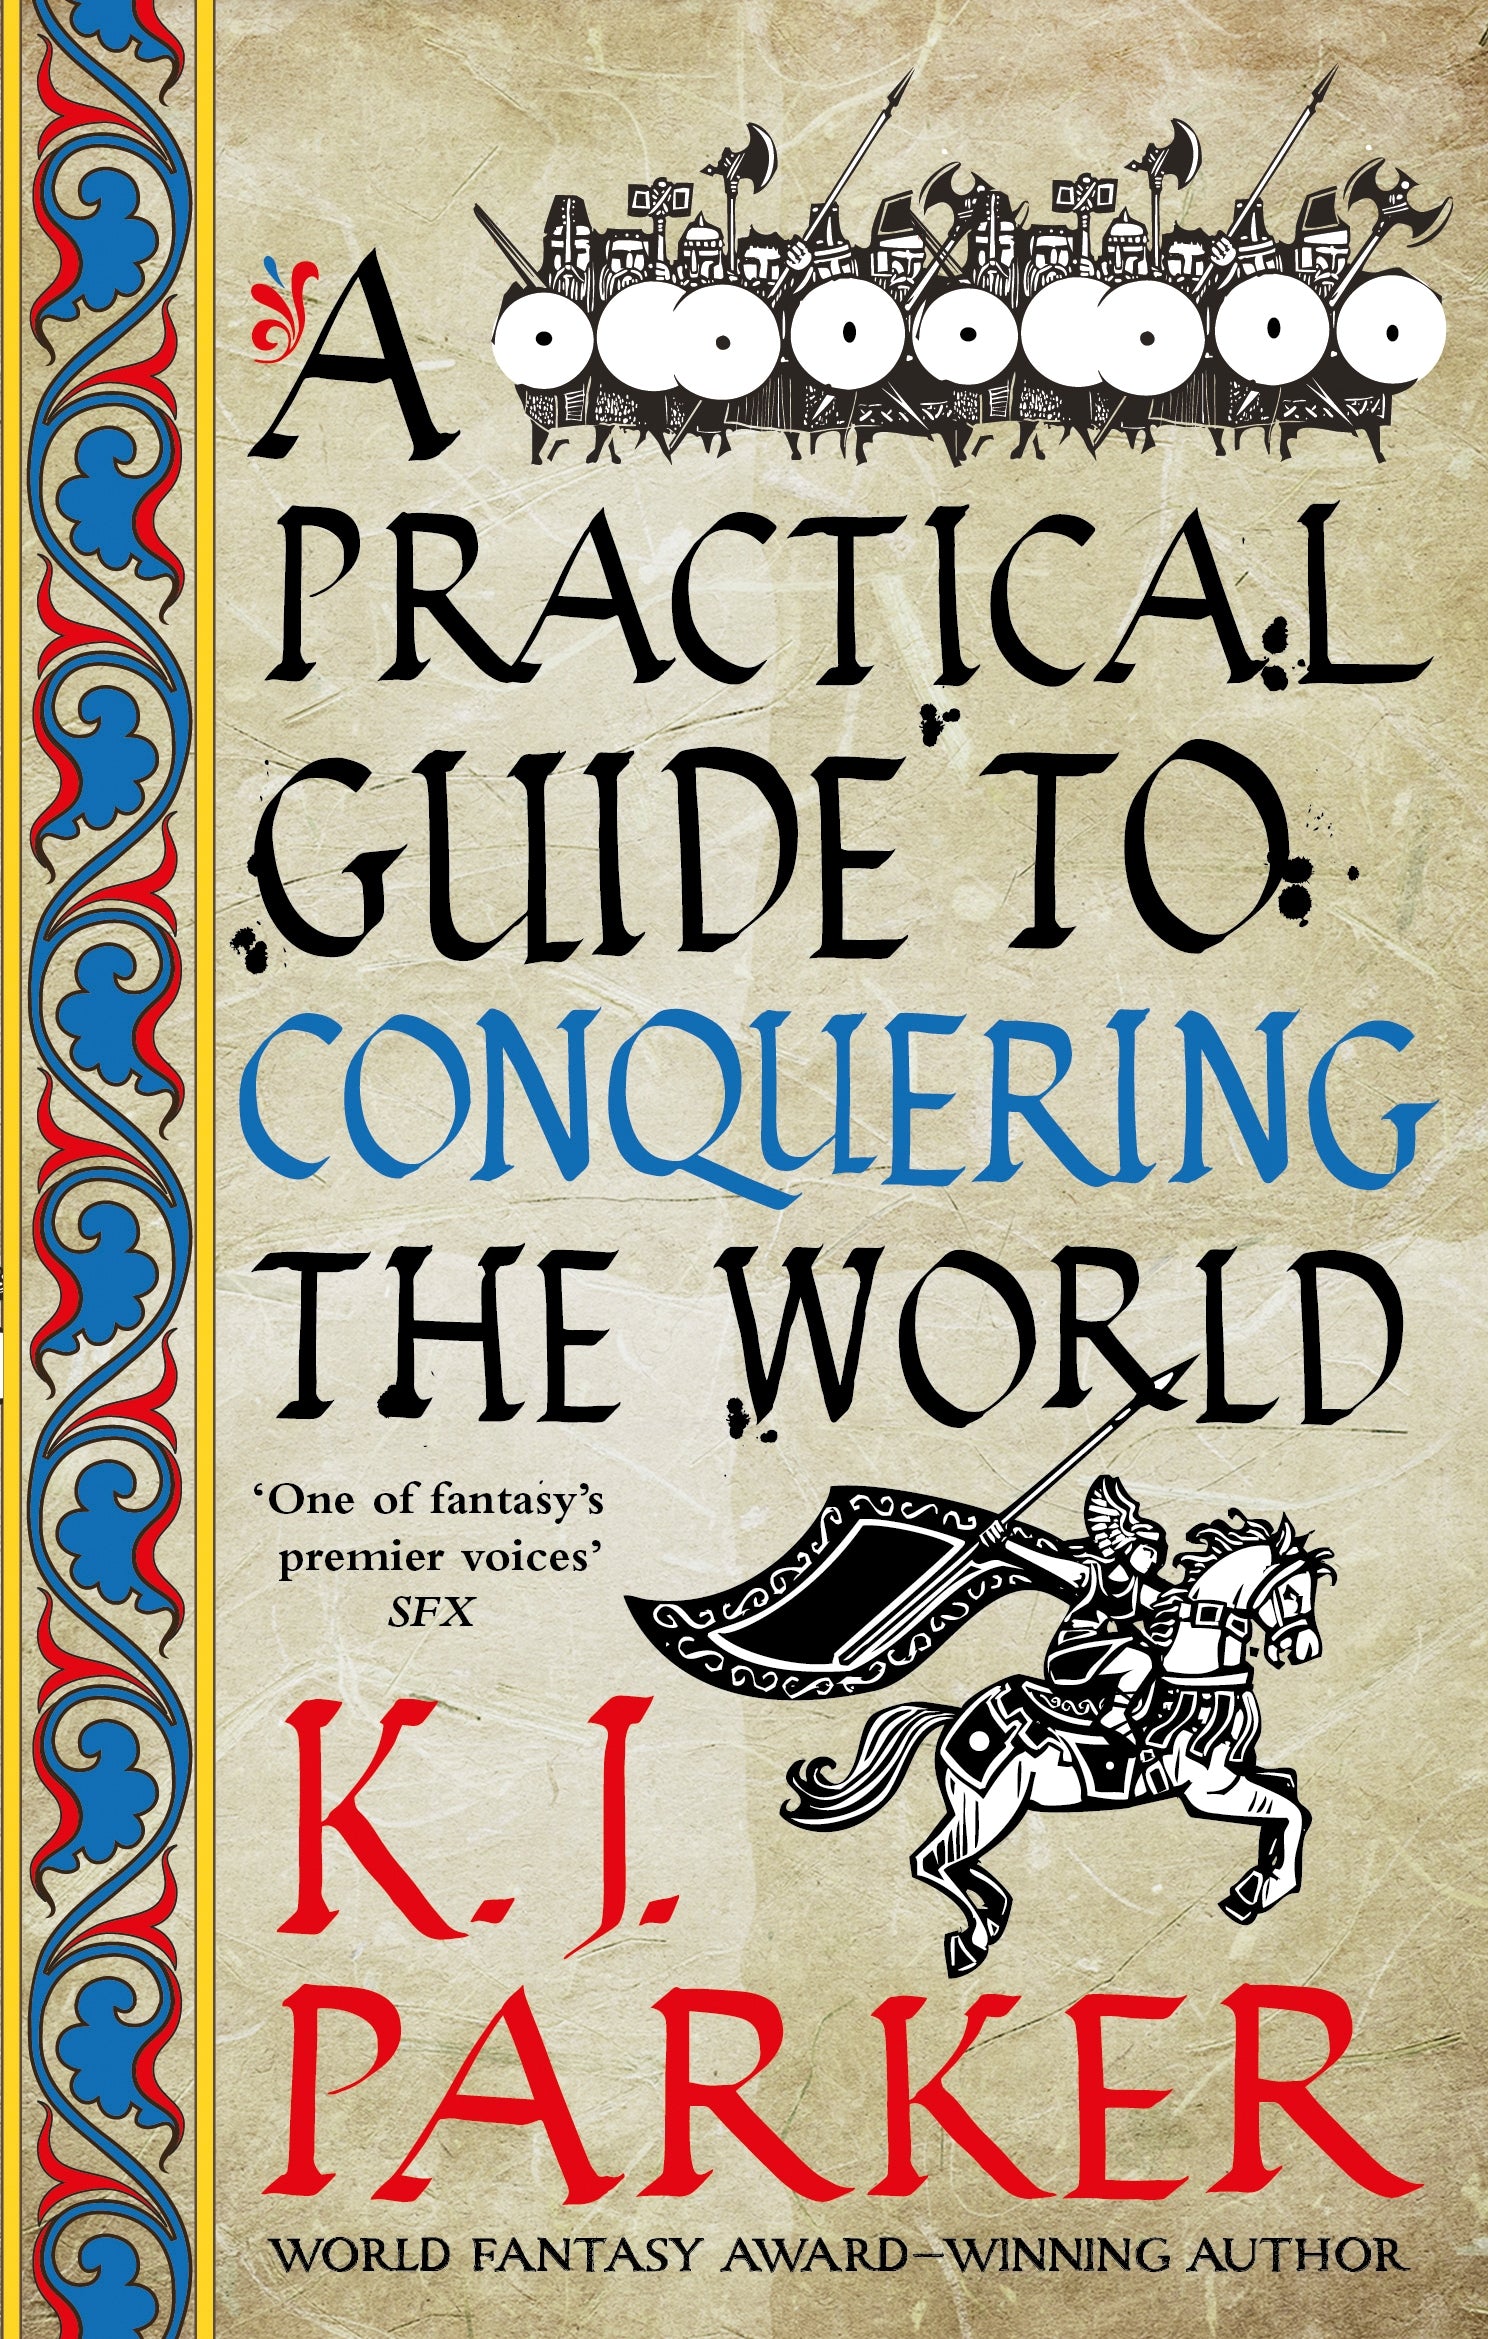 A Practical Guide to Conquering the World by K. J. Parker